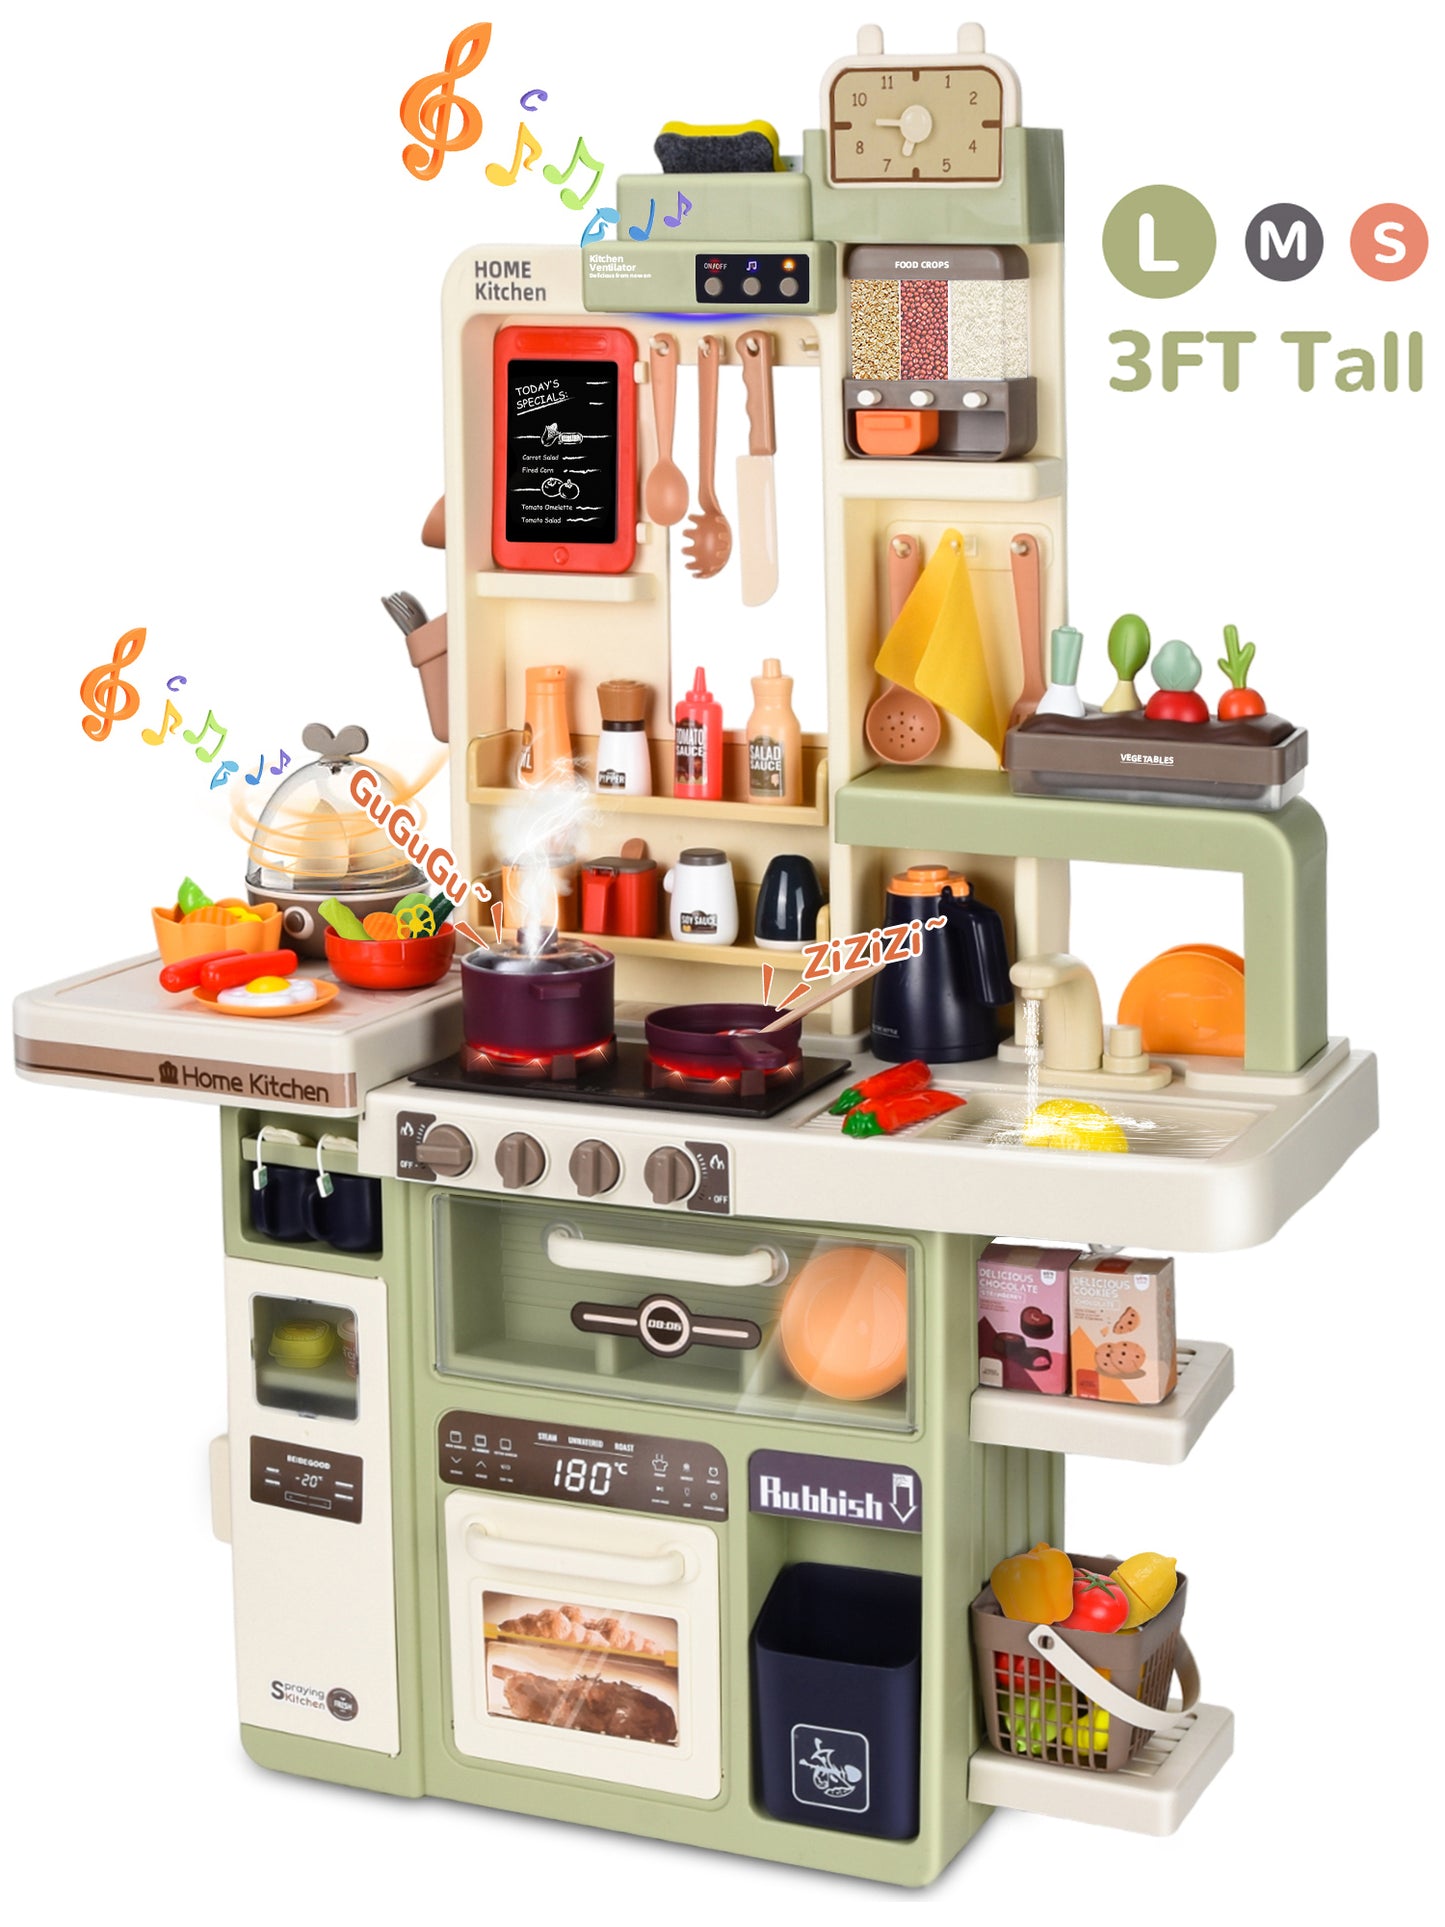 Wisairt Play Kitchen Set for Kids